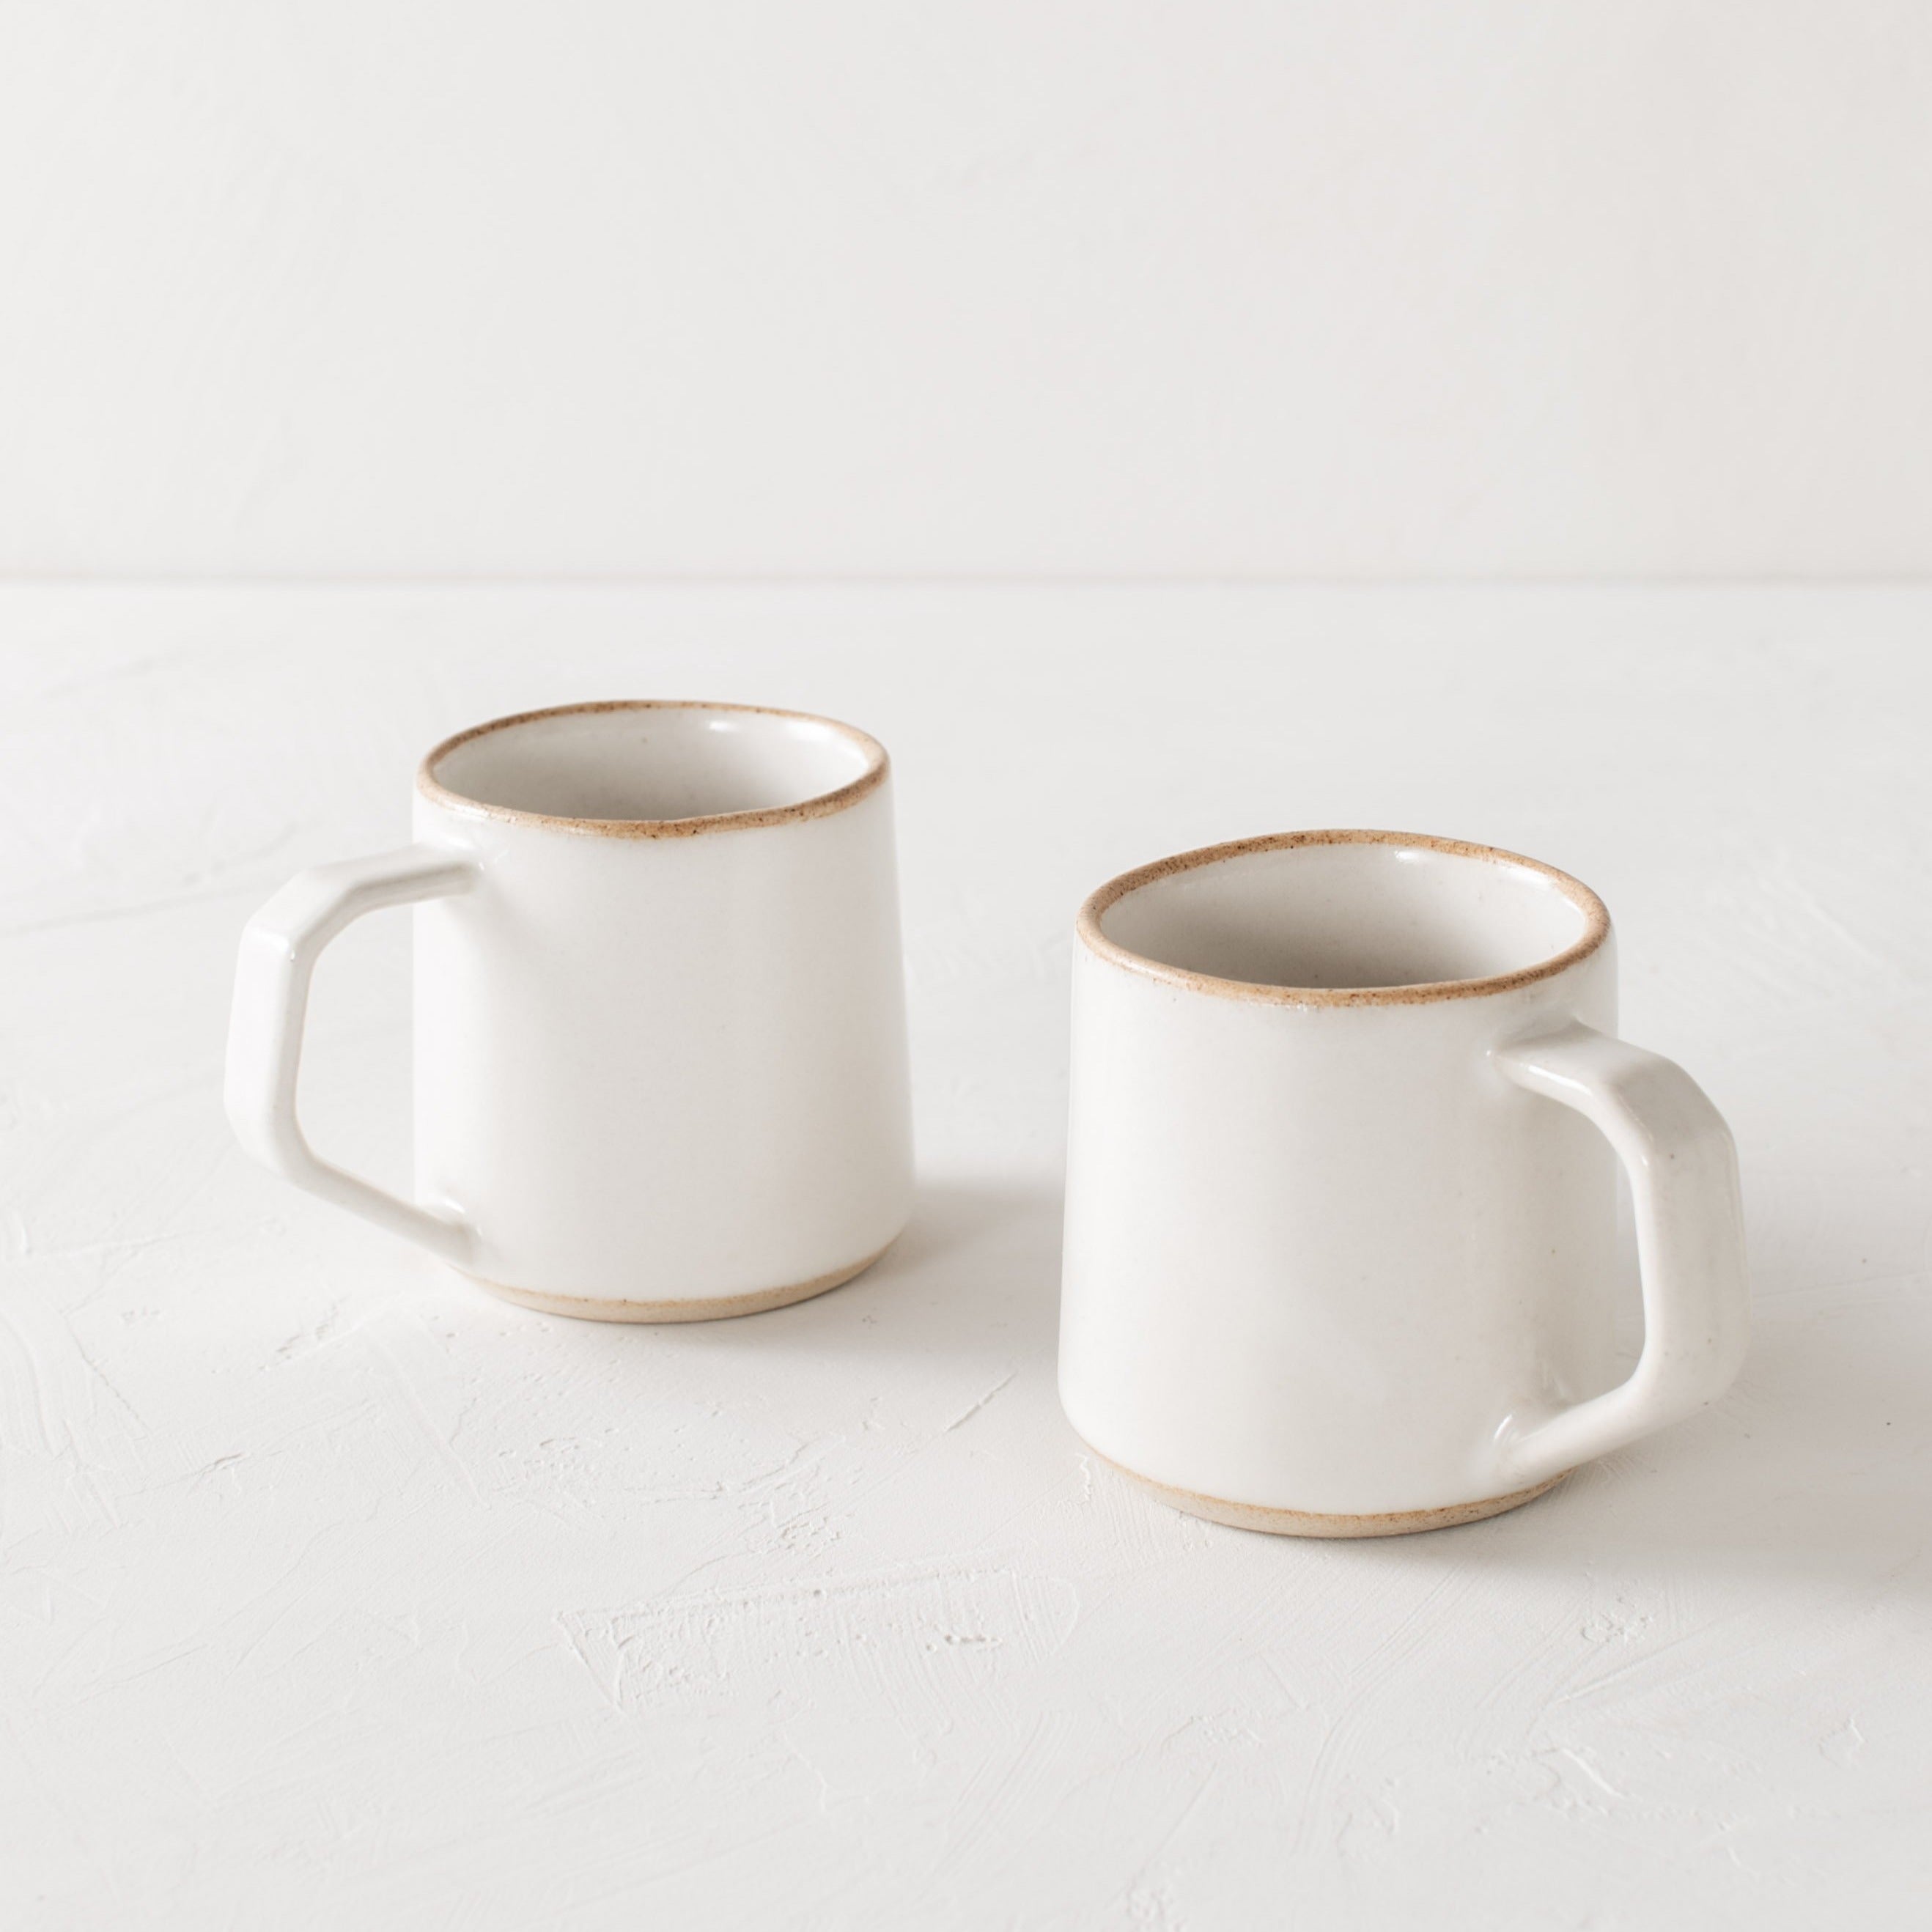 Pair of white minimal ceramic mug is staged on a white textured table top and white textured back drop. Mugs have exposed warm stoneware on the rims as well as the base. Handles are geometric in shape but still rounded. Convivial Production, Kansas City Ceramics. Handmade ceramic mug.